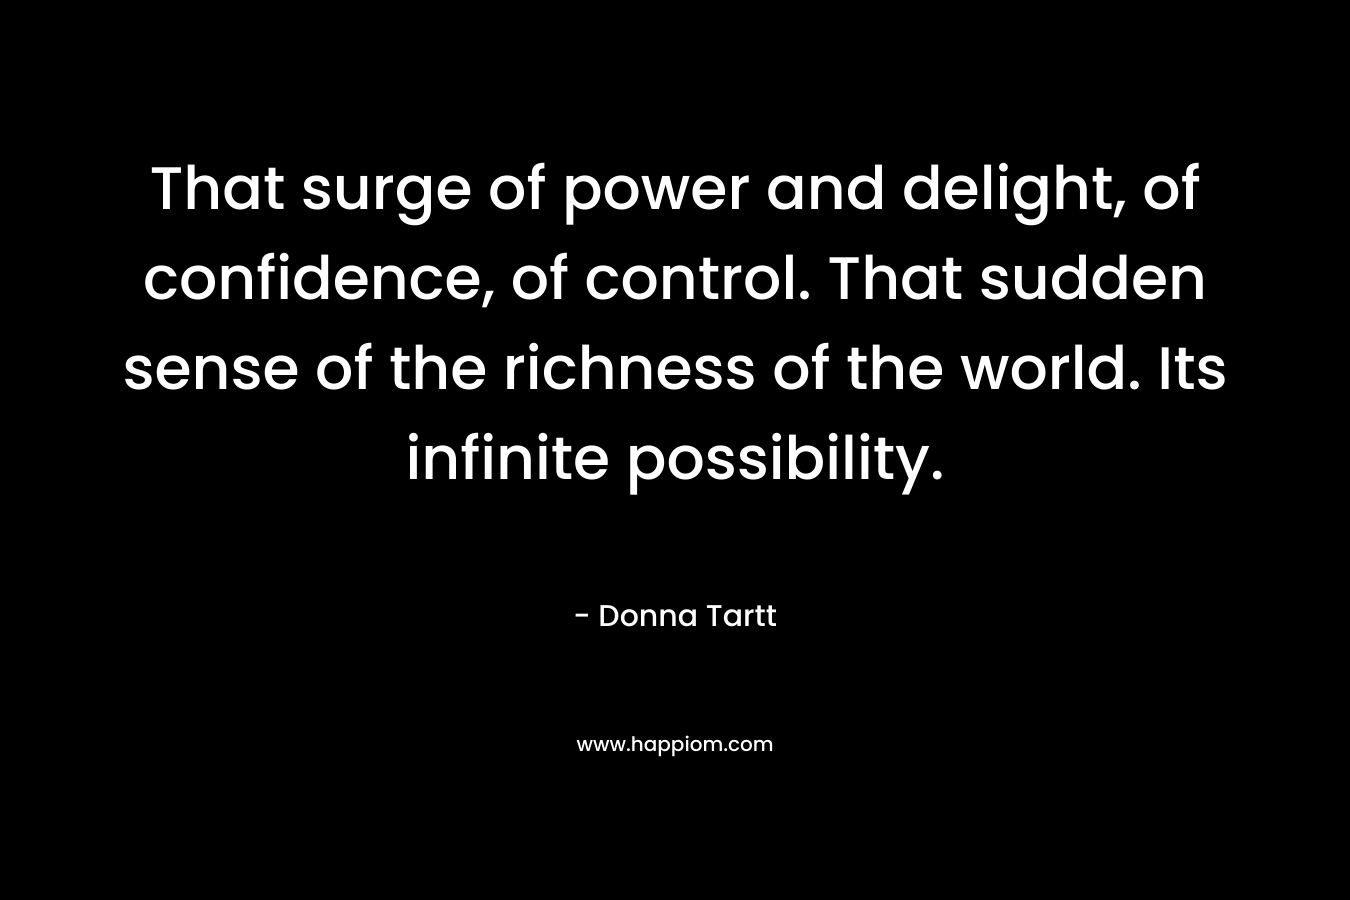 That surge of power and delight, of confidence, of control. That sudden sense of the richness of the world. Its infinite possibility. – Donna Tartt